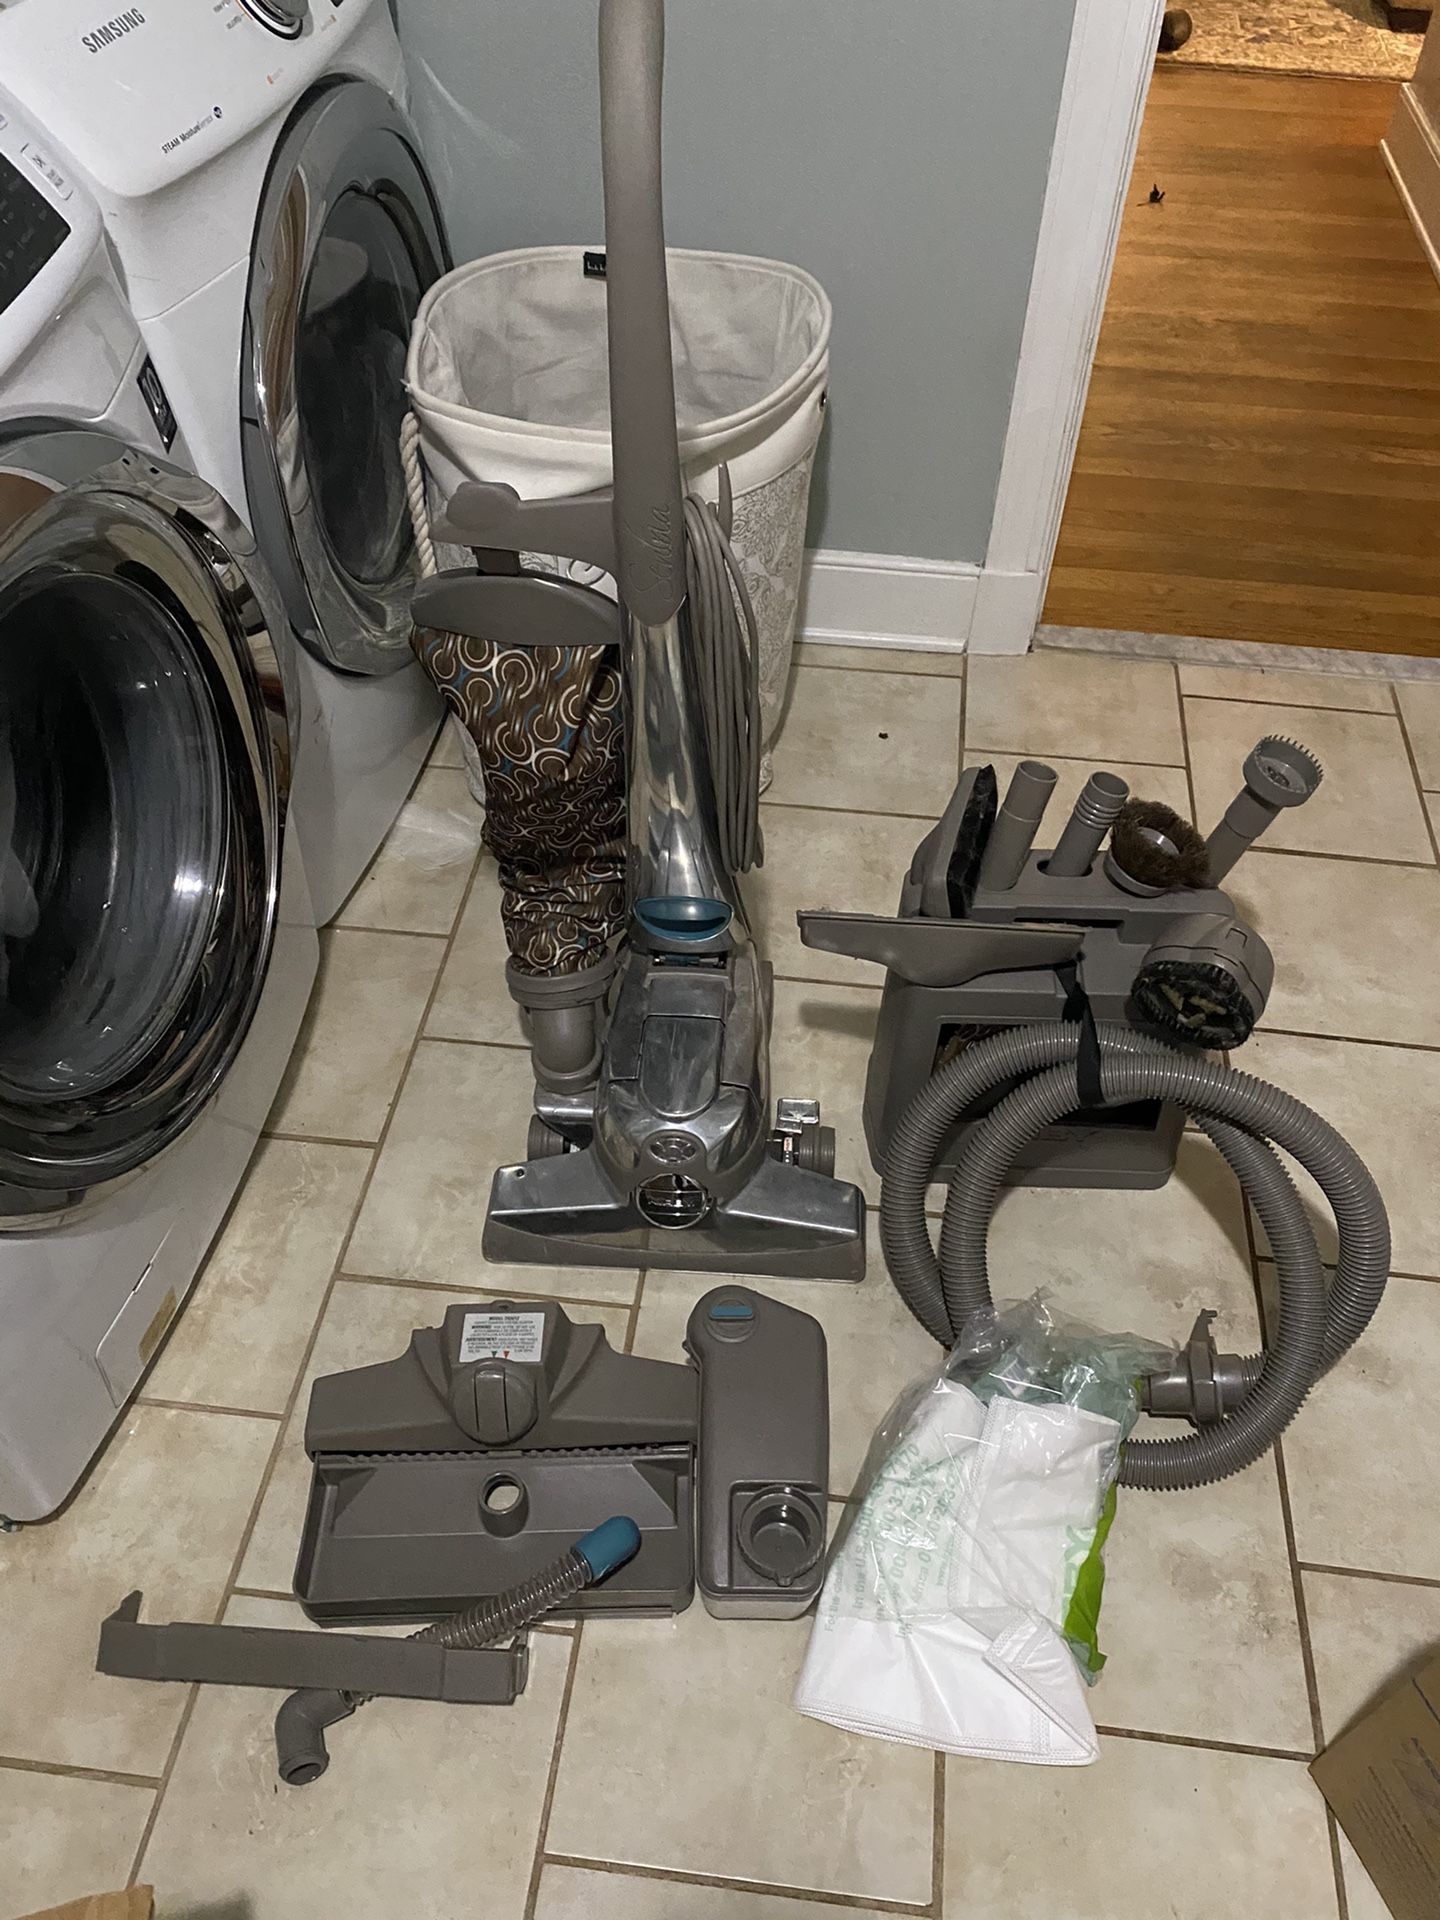 *FREE* Kirby Sentria Vacuum With Shampooer Attachment & Accessories